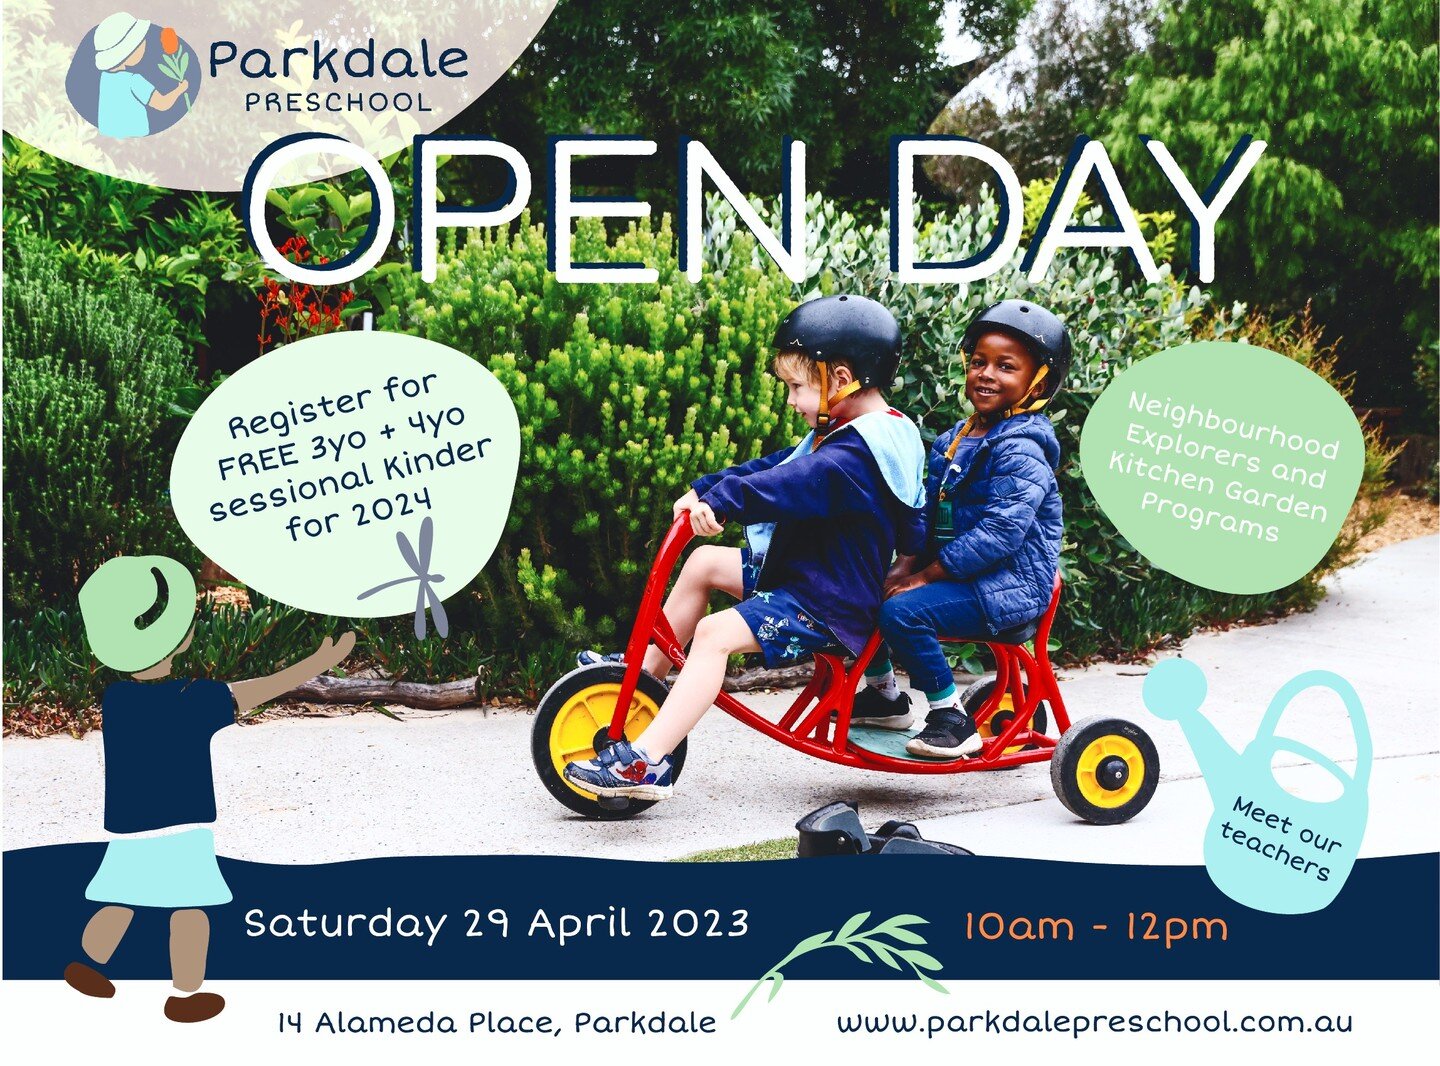 Explore our wonderful community kindergarten at our Open Day on Saturday 29 April from 10am - 12pm.
Find out more at: www.parkdalepreschool.com.au